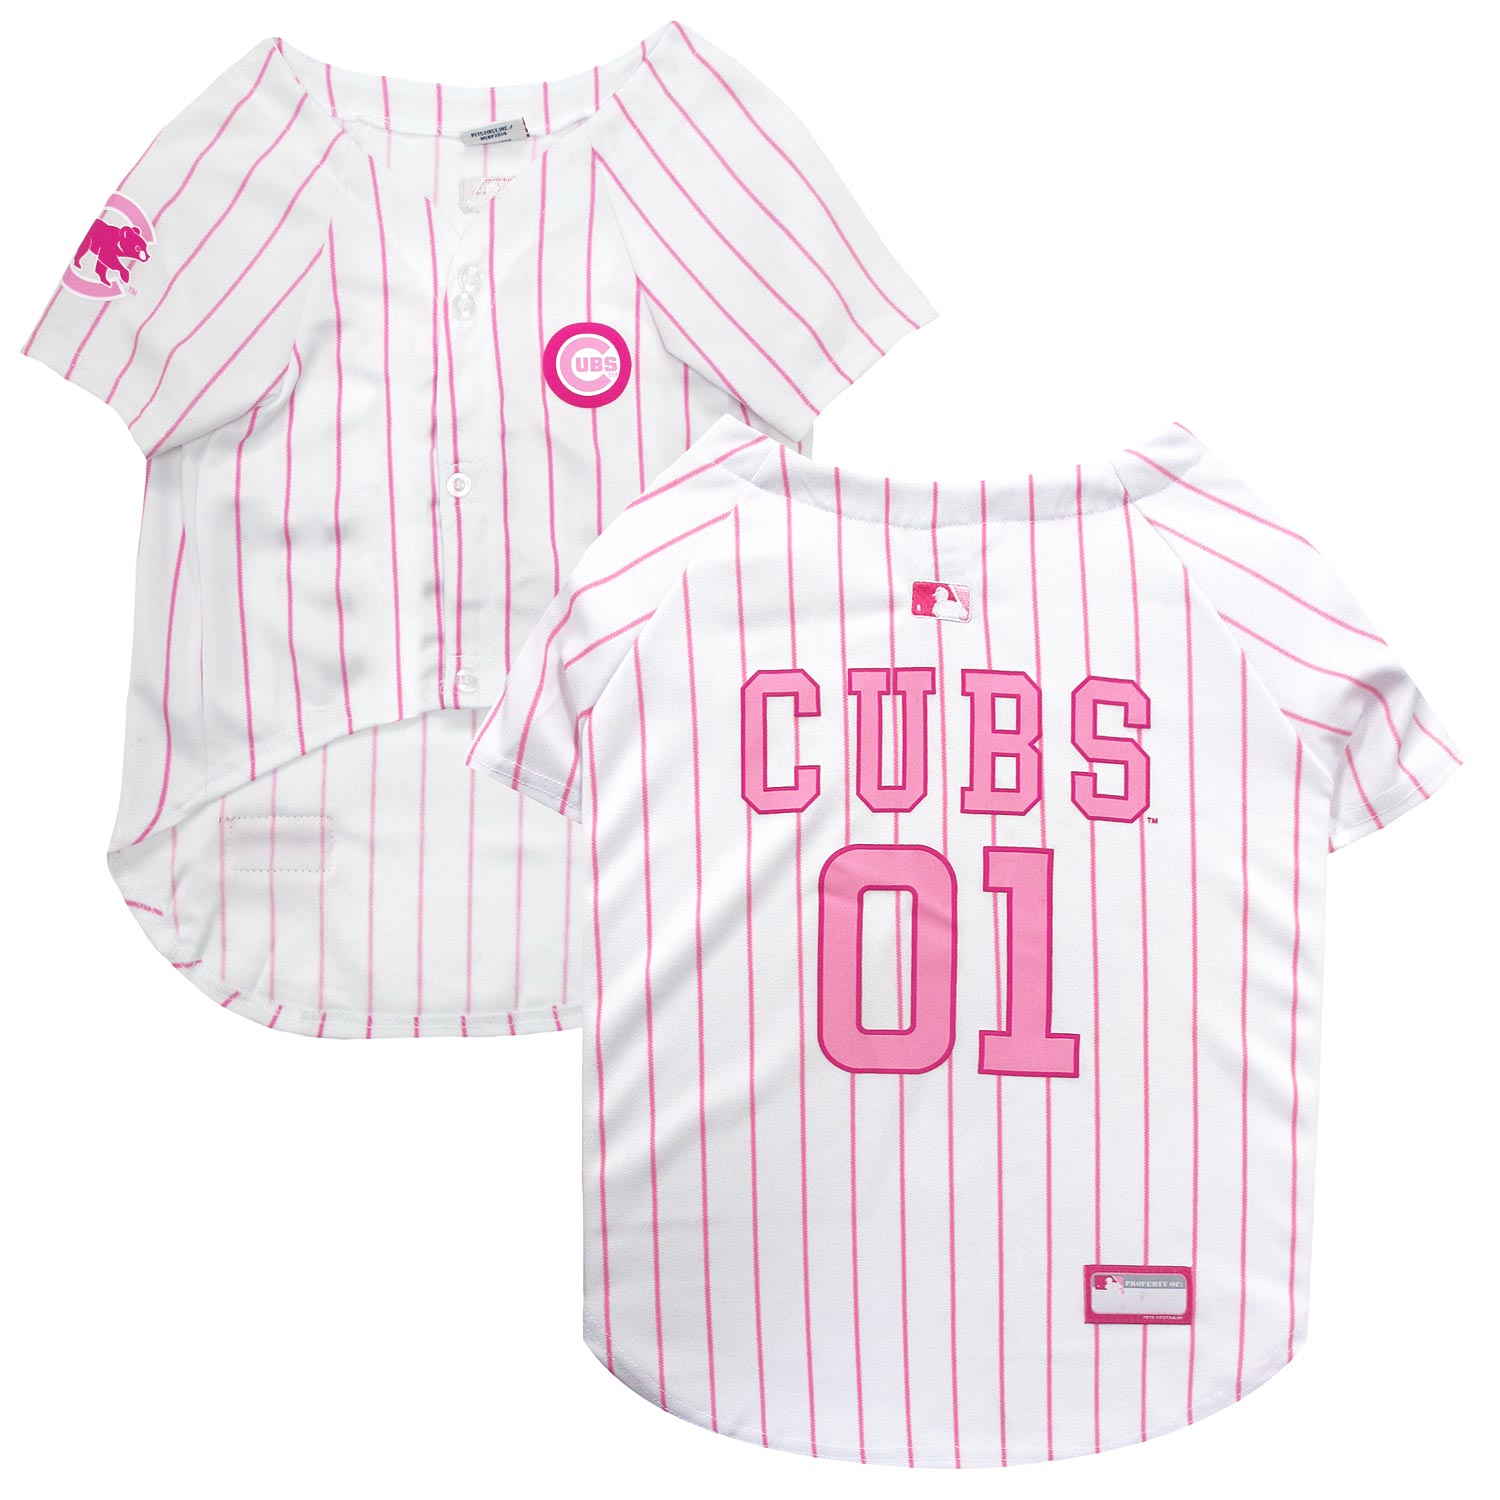 Pets First MLB Chicago Cubs Baseball Pink Jersey - Licensed MLB Jersey -  Large 